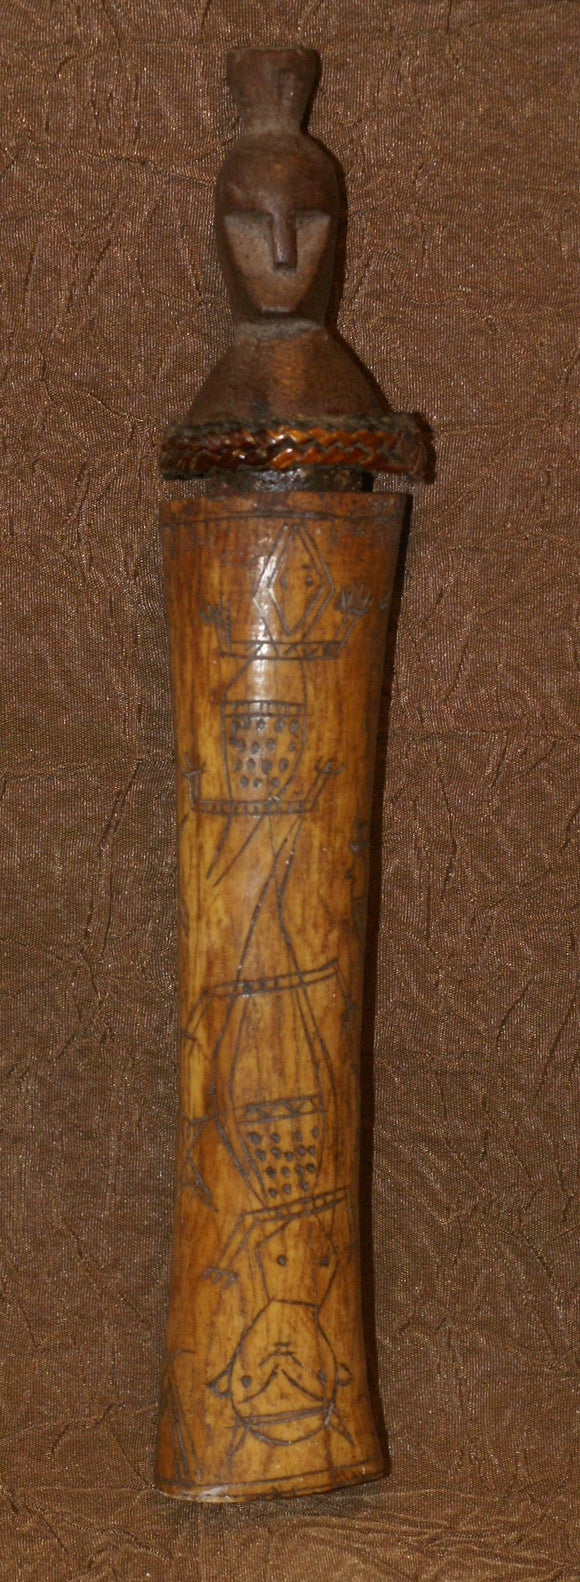 Old Unique Timorese Buffalo Bone Scrimshaw Hand Etched Lime Container, Ethnic Tribal  Flute Tube, Totem Effigy Motif with Hand Carved Wood Stopper Representing an Ancestor Face for Protection Against Evil, & used during the betel nut-lime habit. BN55